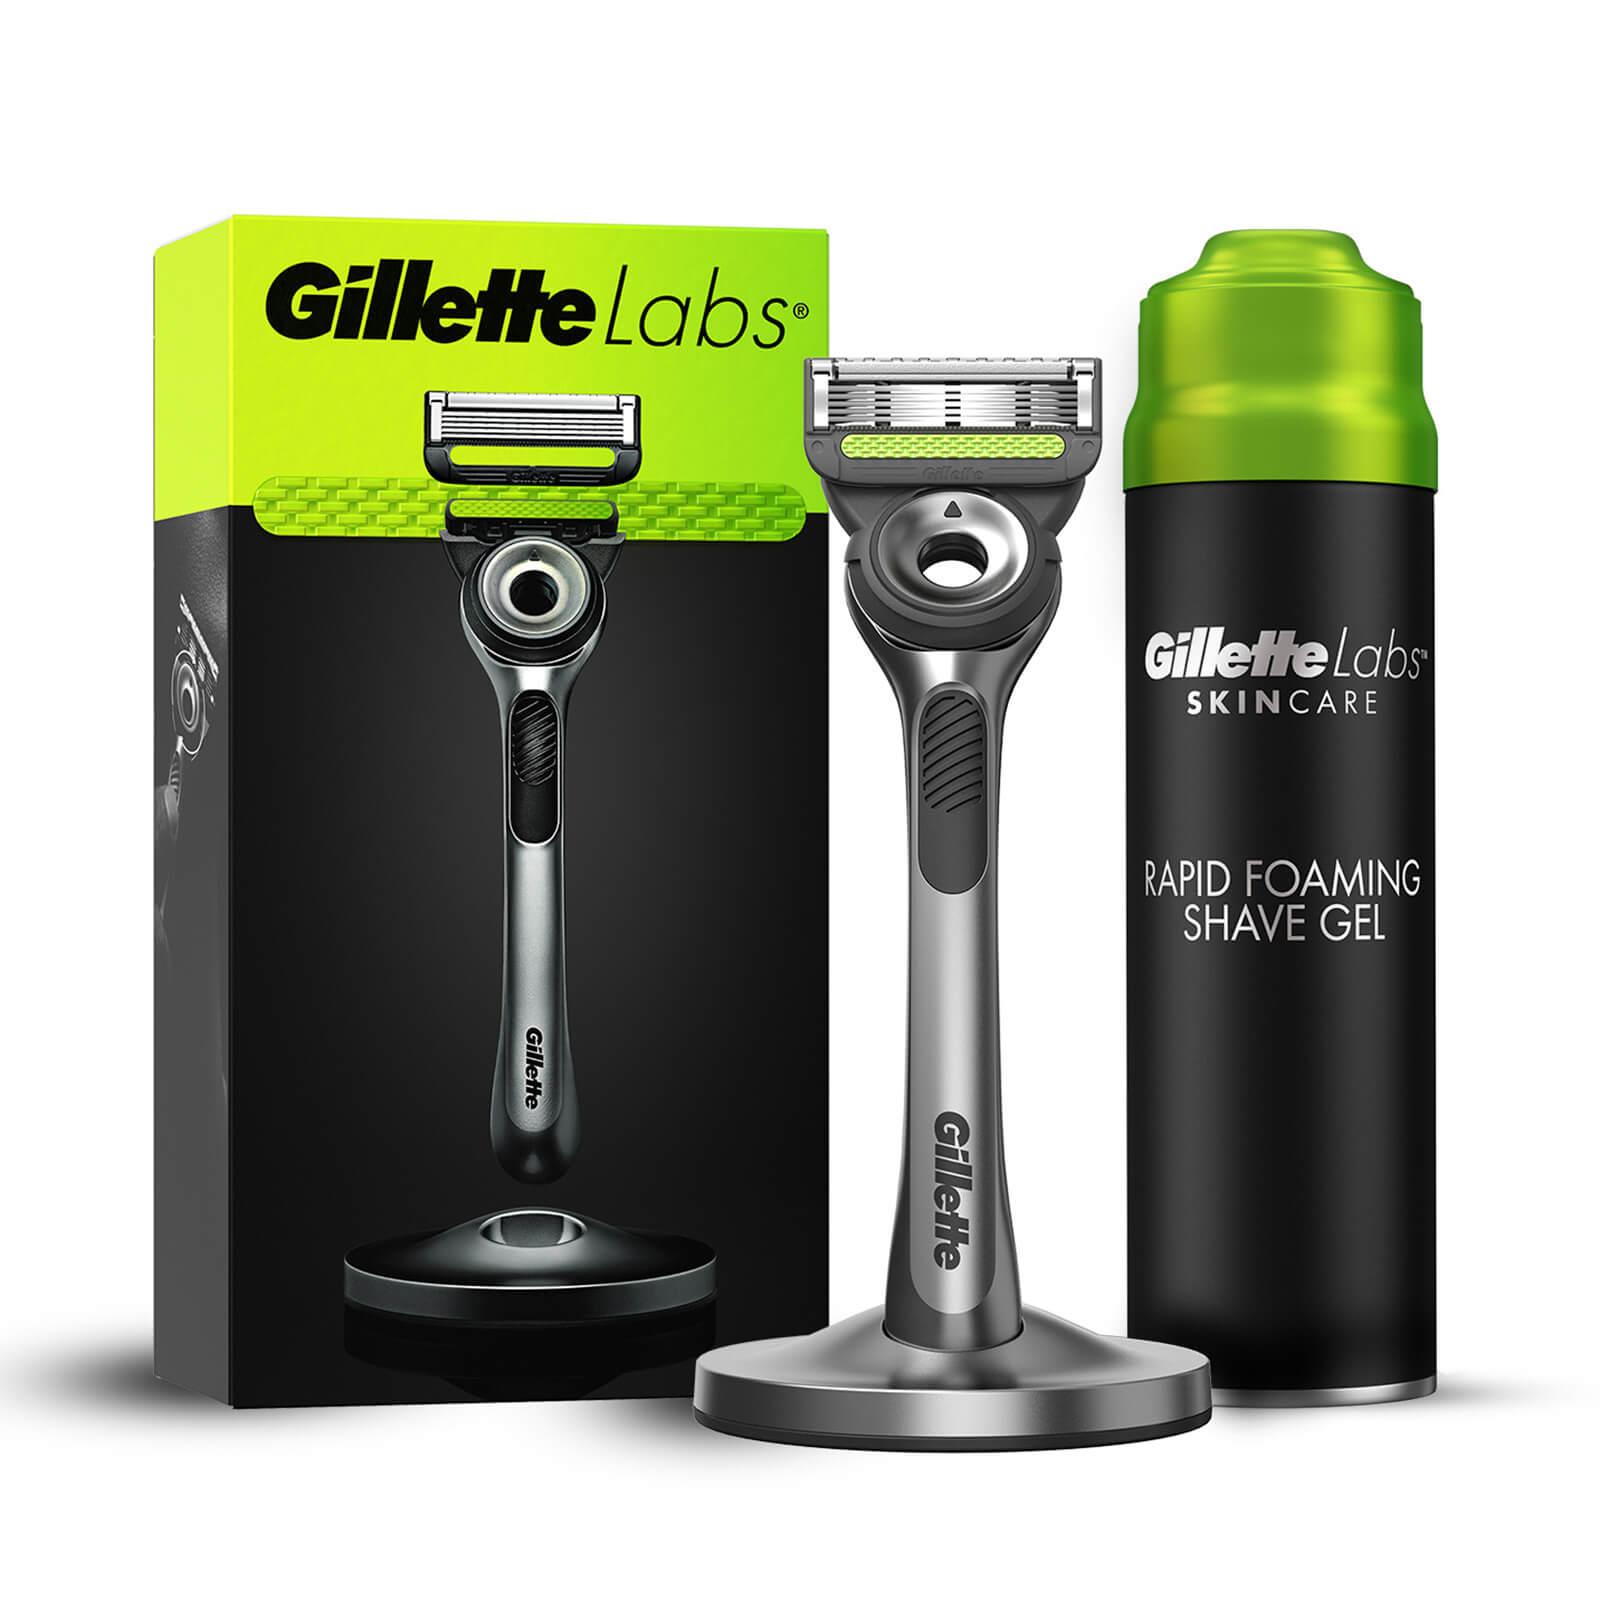 Gillette Labs Razor with Exfoliating Bar and Shaving Gel - Silver Razor  Magnetic Stand  Shaving Gel